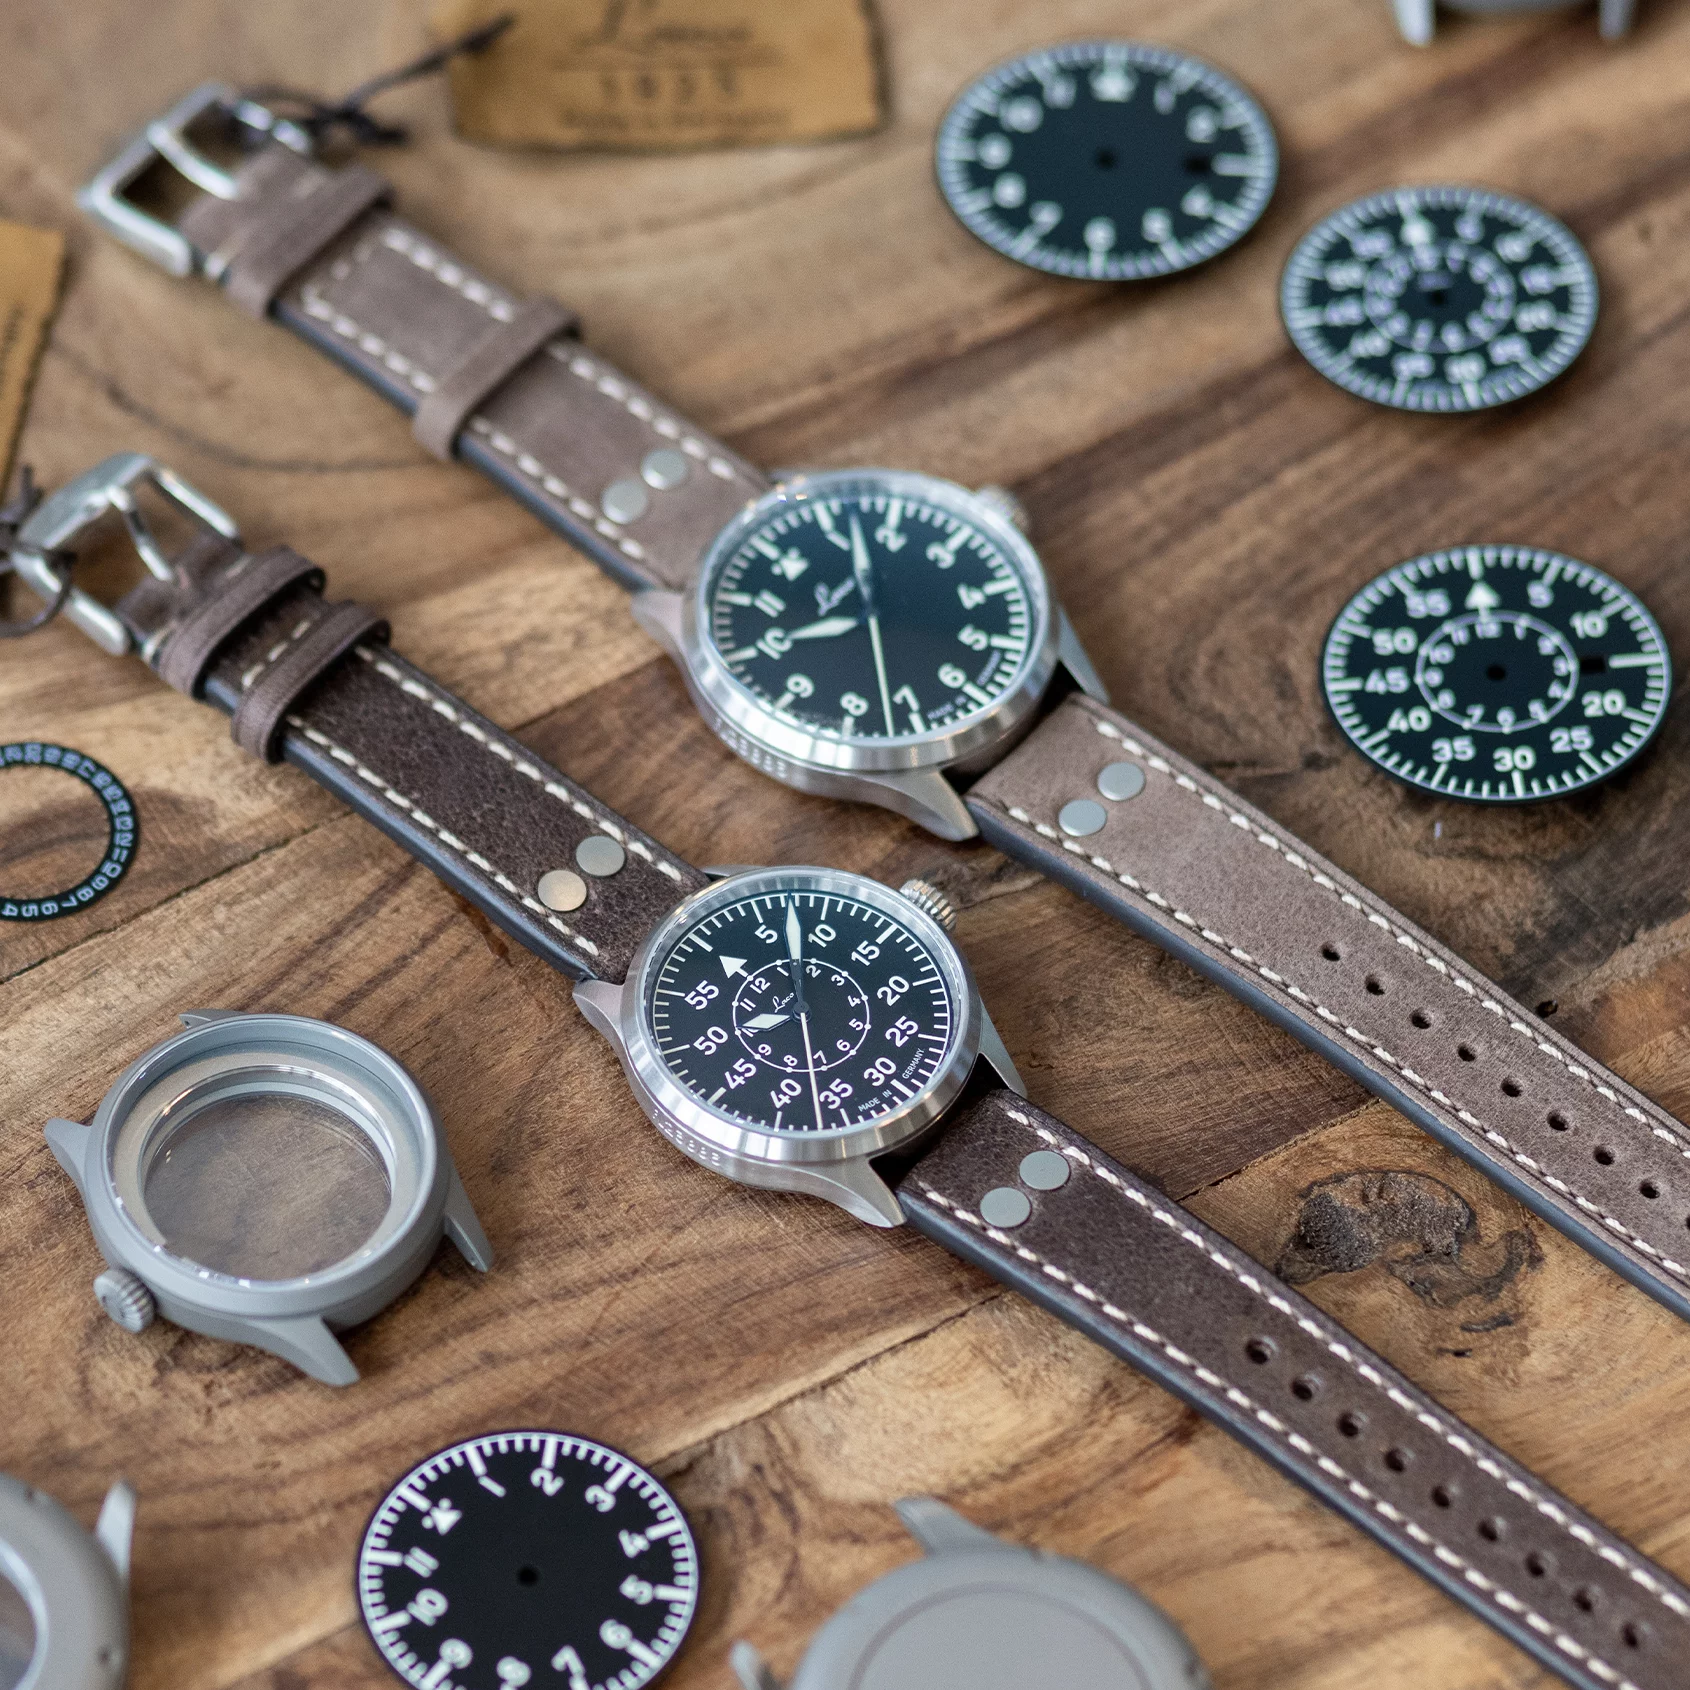 HANDS-ON: The Laco PRO Series